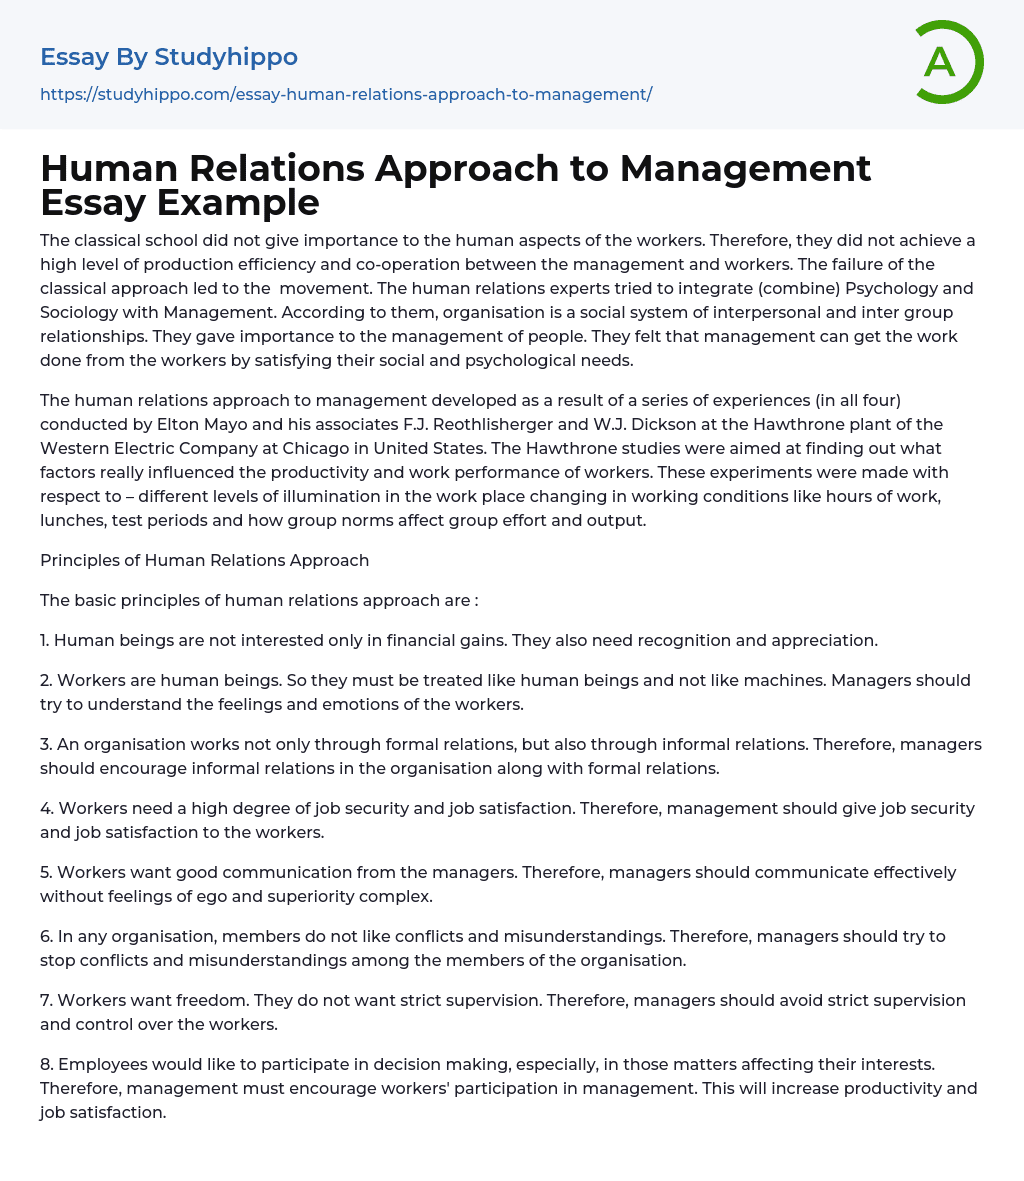 Human Relations Approach to Management Essay Example